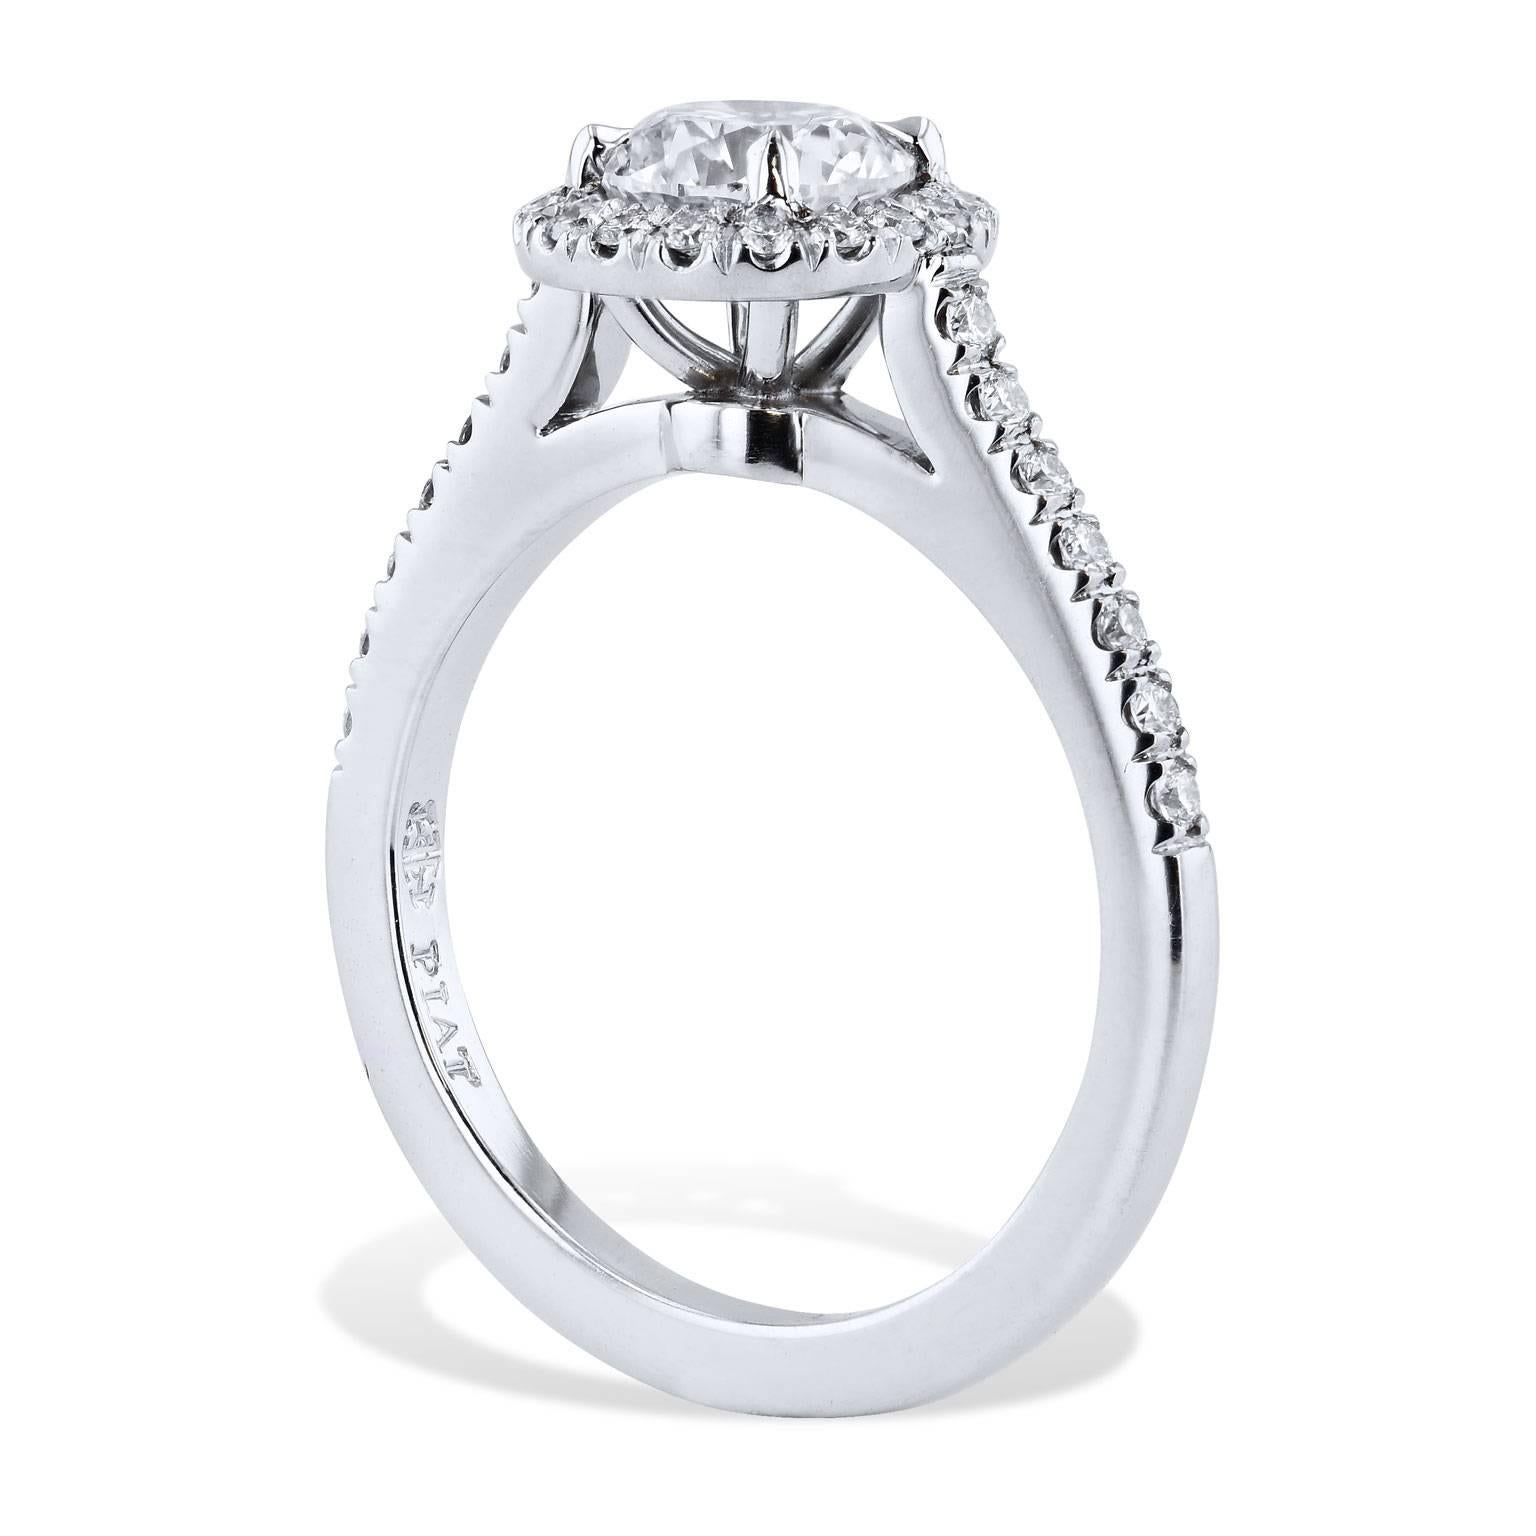 GIA Certified Handmade 1.00 Carat Round Diamond Halo Engagement Ring

This platinum engagement ring features a 1.00 carat round prong-set diamond (H/VS2; GIA# 2185686724) at center. 0.13 carat of round diamonds are pave-set in halo surrounding the